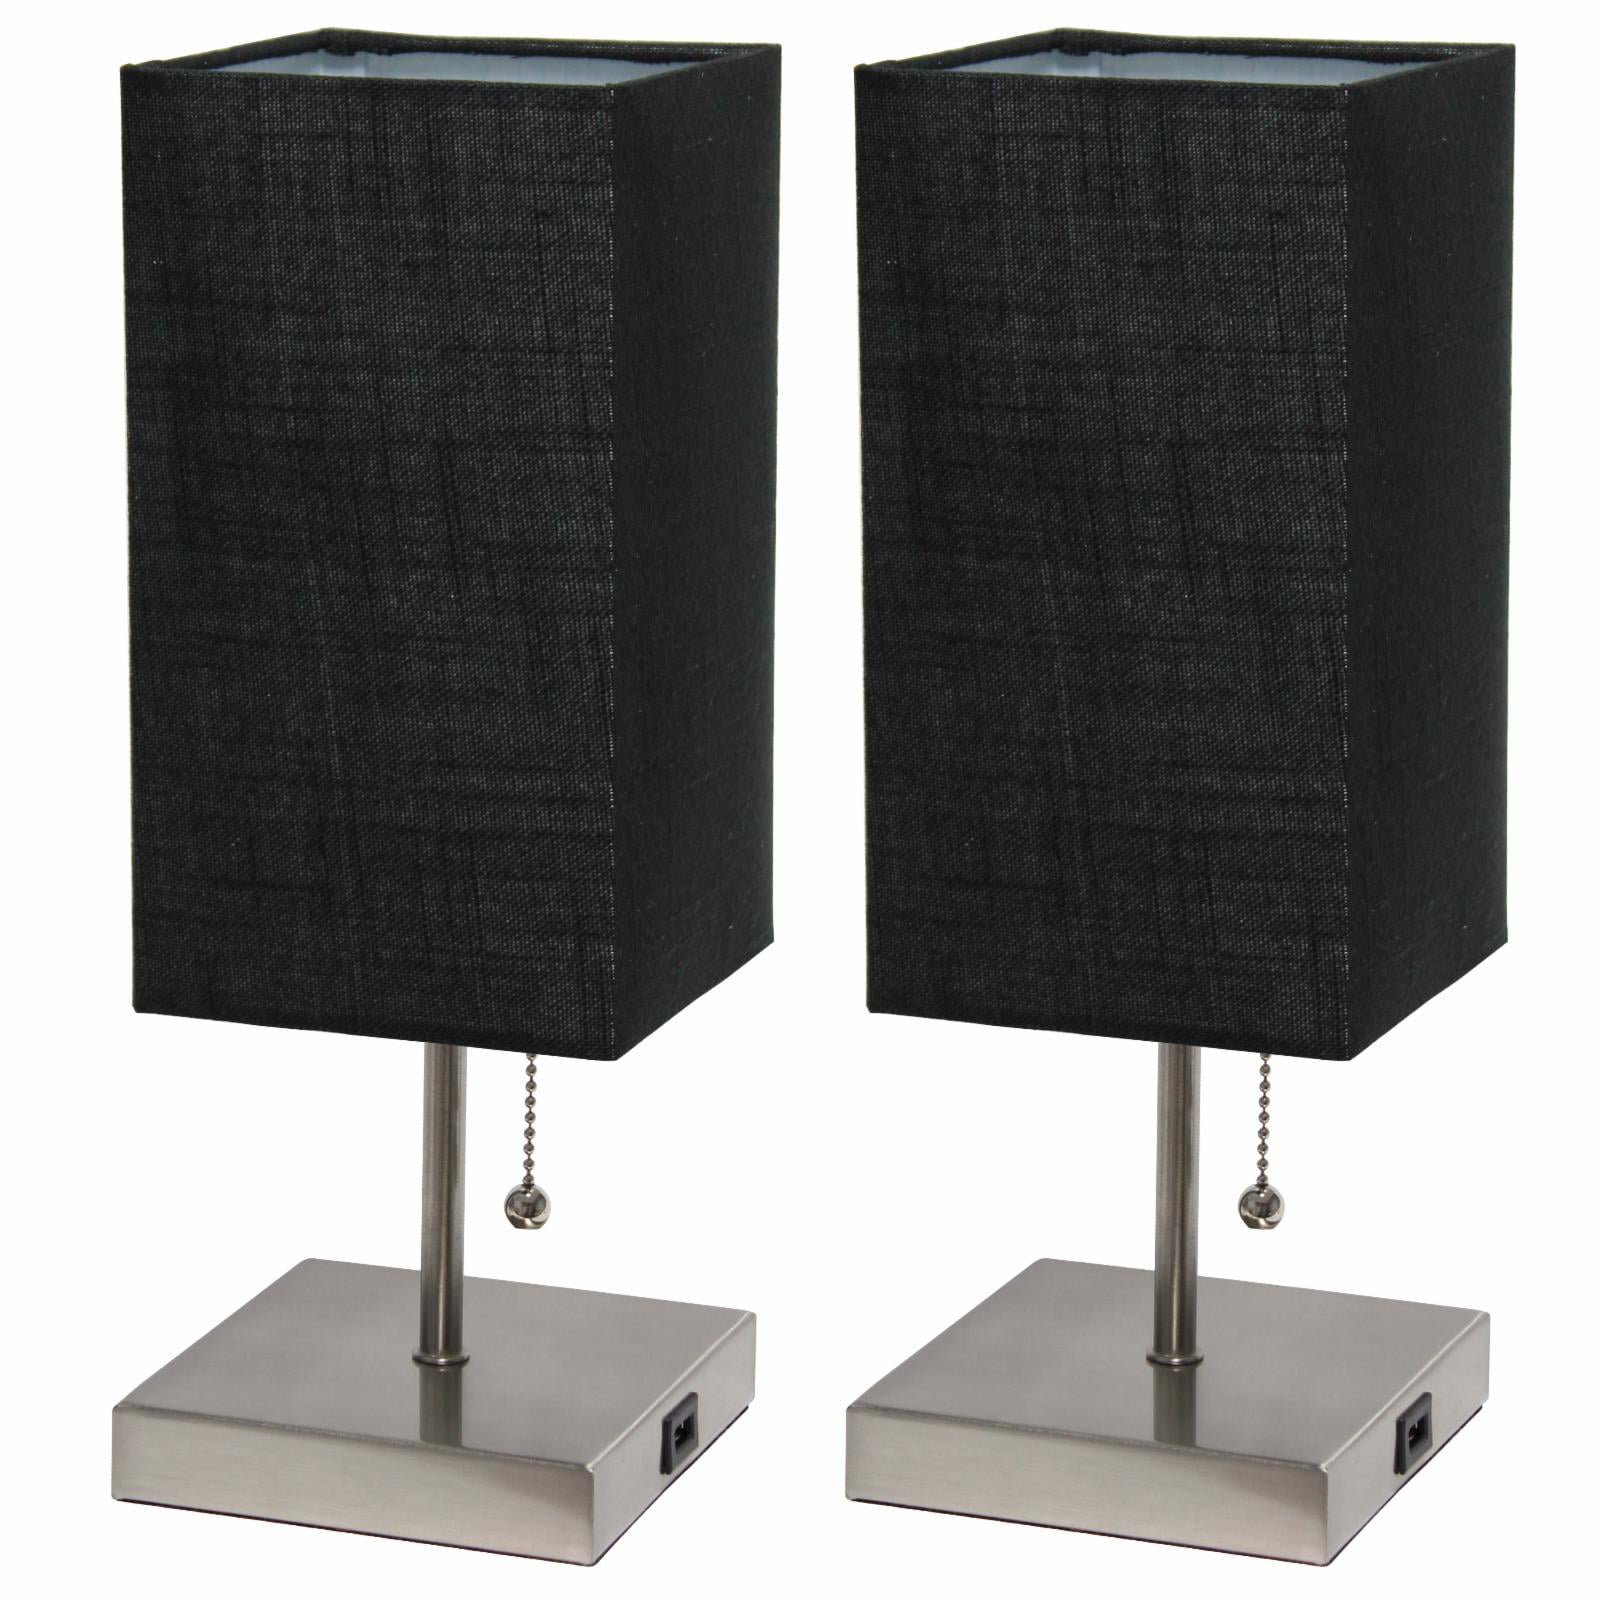 Simple Designs Petite White Stick Lamp with USB Charging Port and Fabric Shade 2 Pack Set, Black